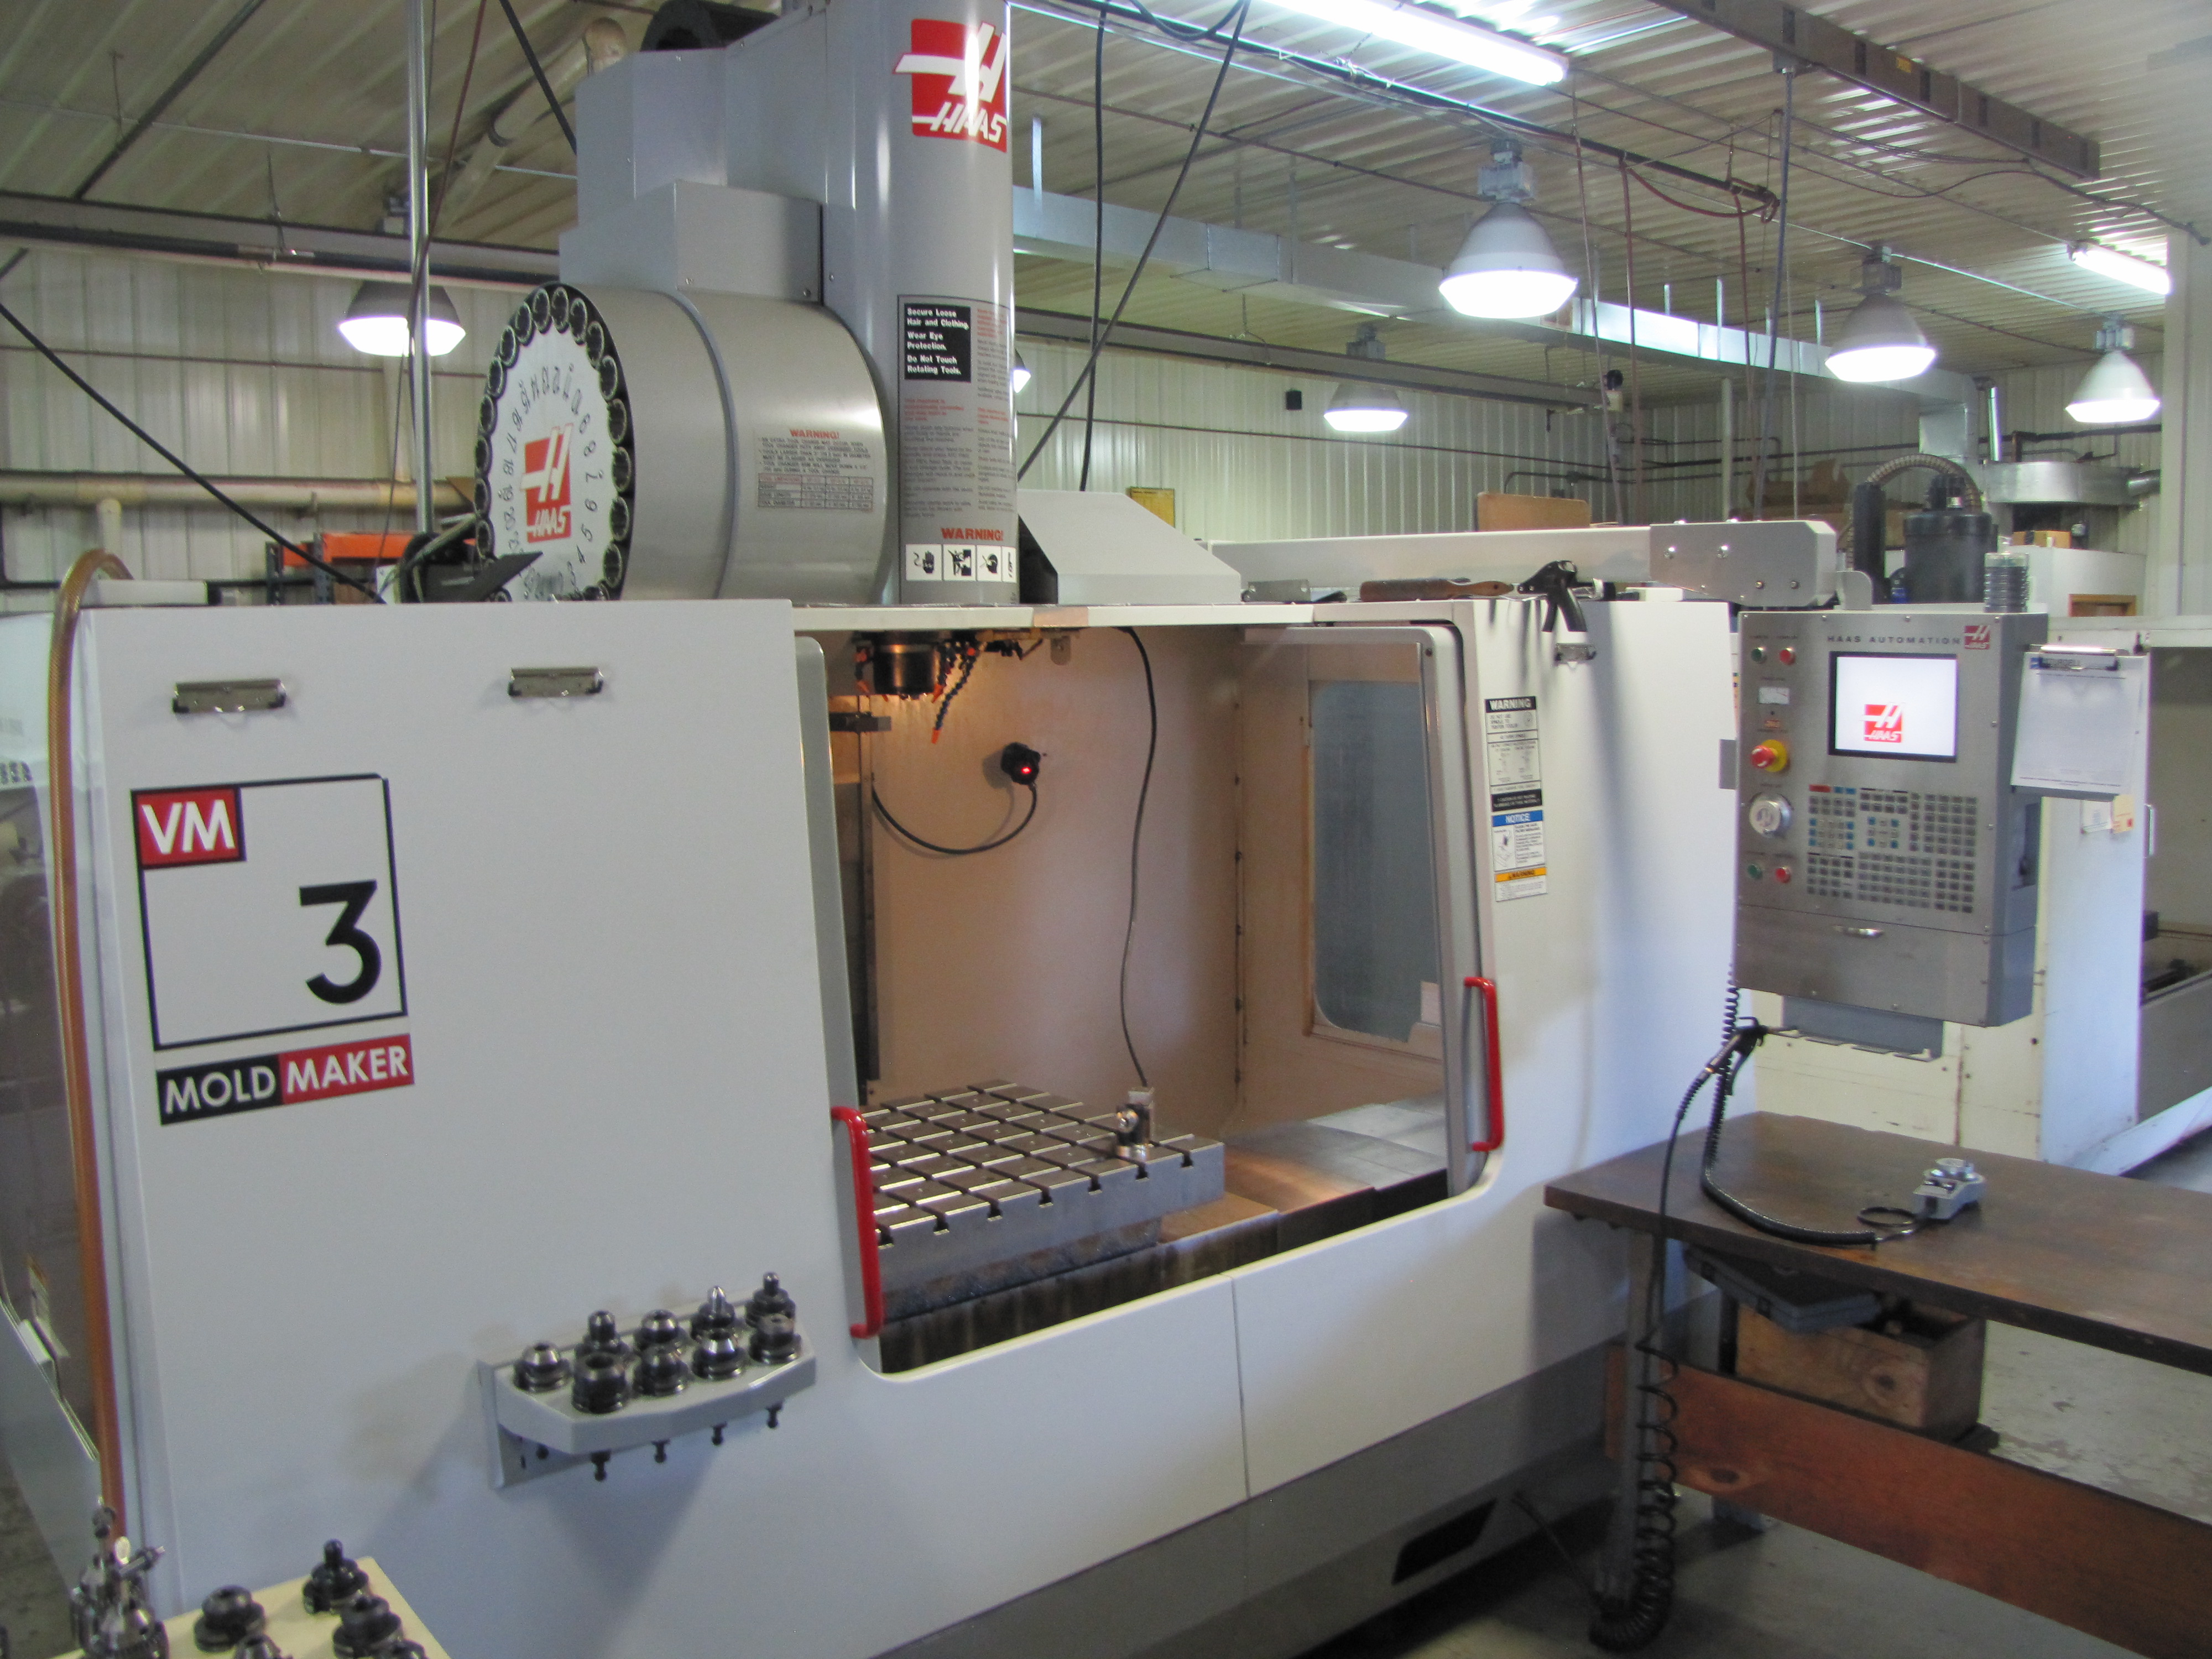 OWNER RETIRING, PREMIER TOOL PRODUCTS. WELL MAINTAINED MACHINERY, ONE OWNER CNC MACHINES. EVERYTHING MUST GO.